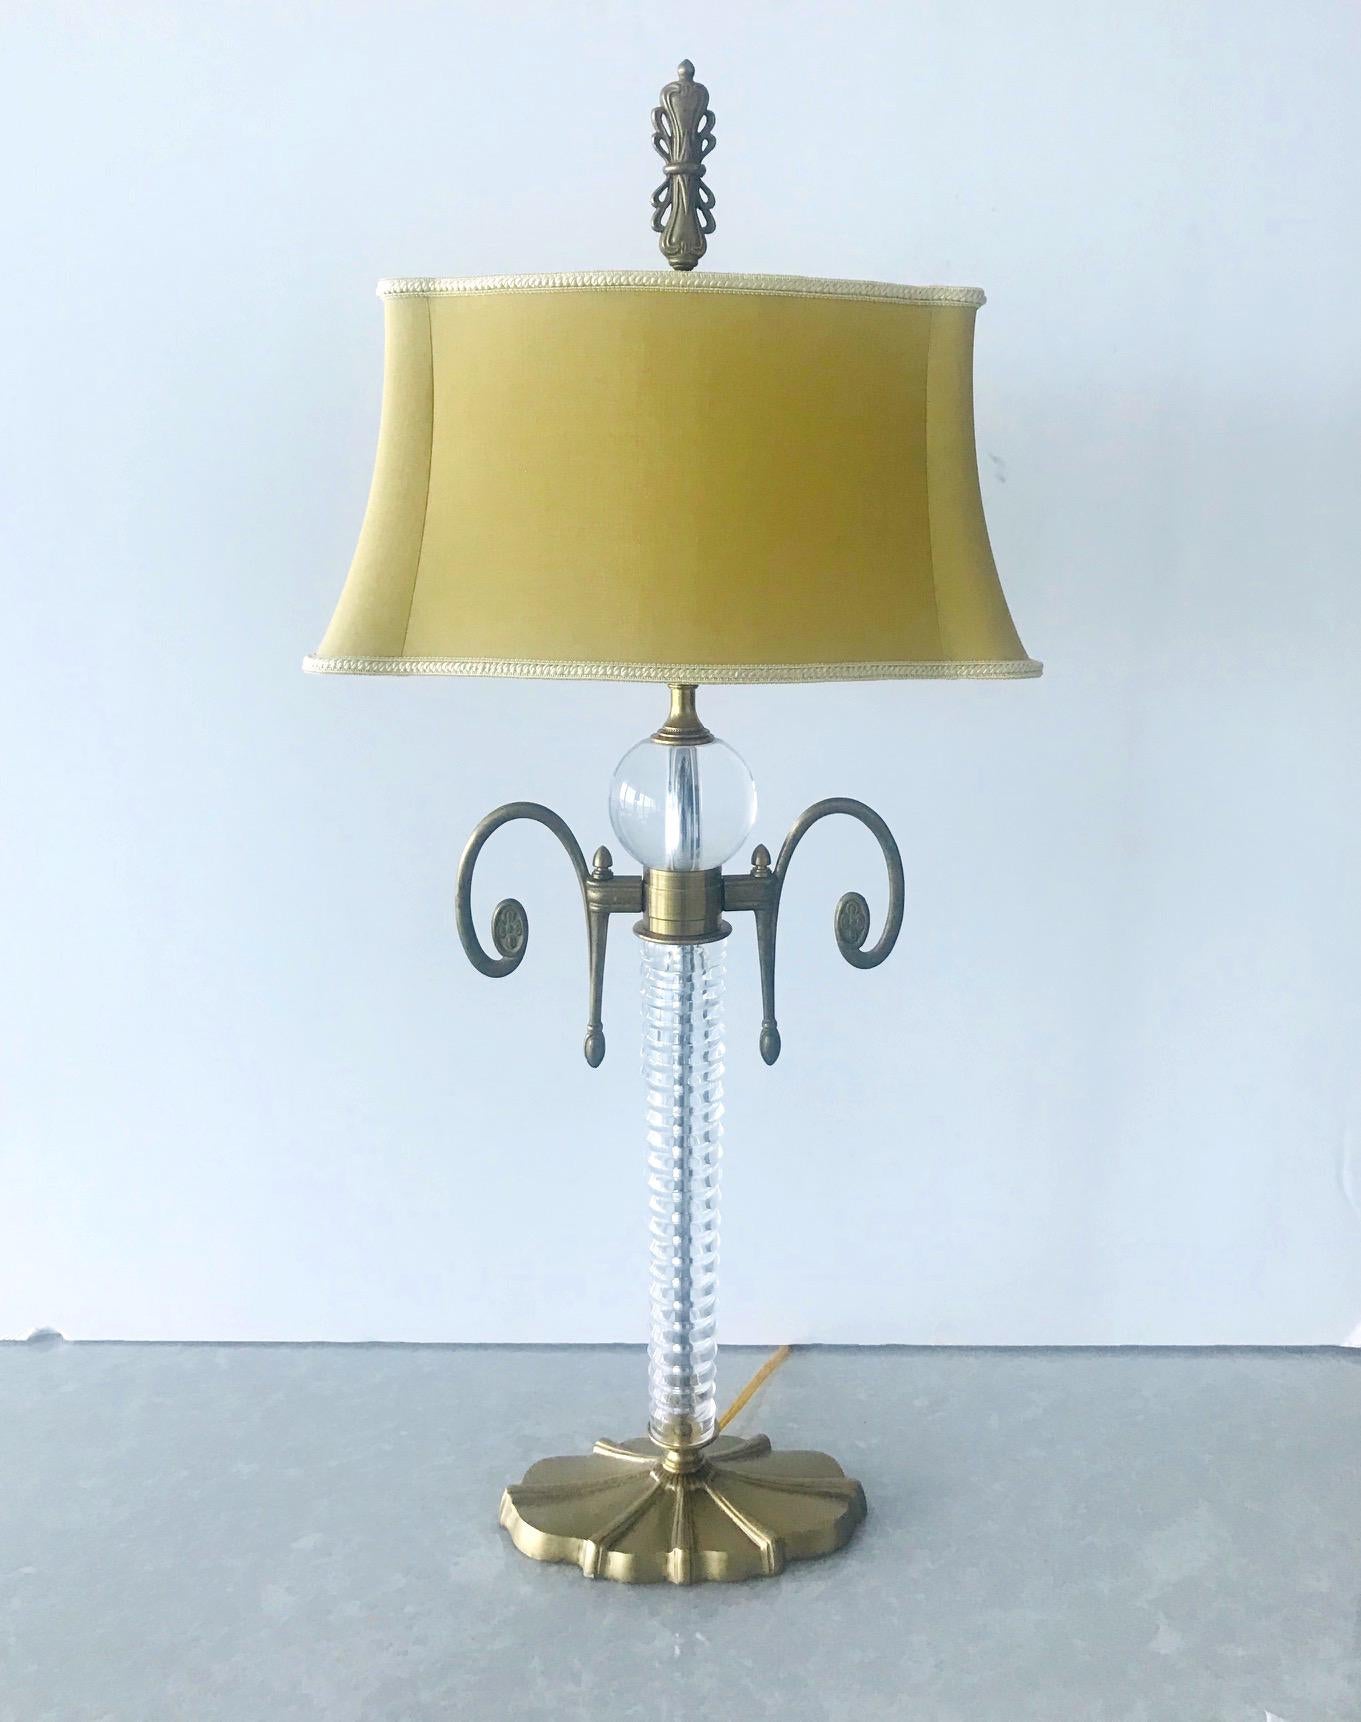 Gilt Pair of Exquisite Art Deco Glass and Gilded Brass Lamps